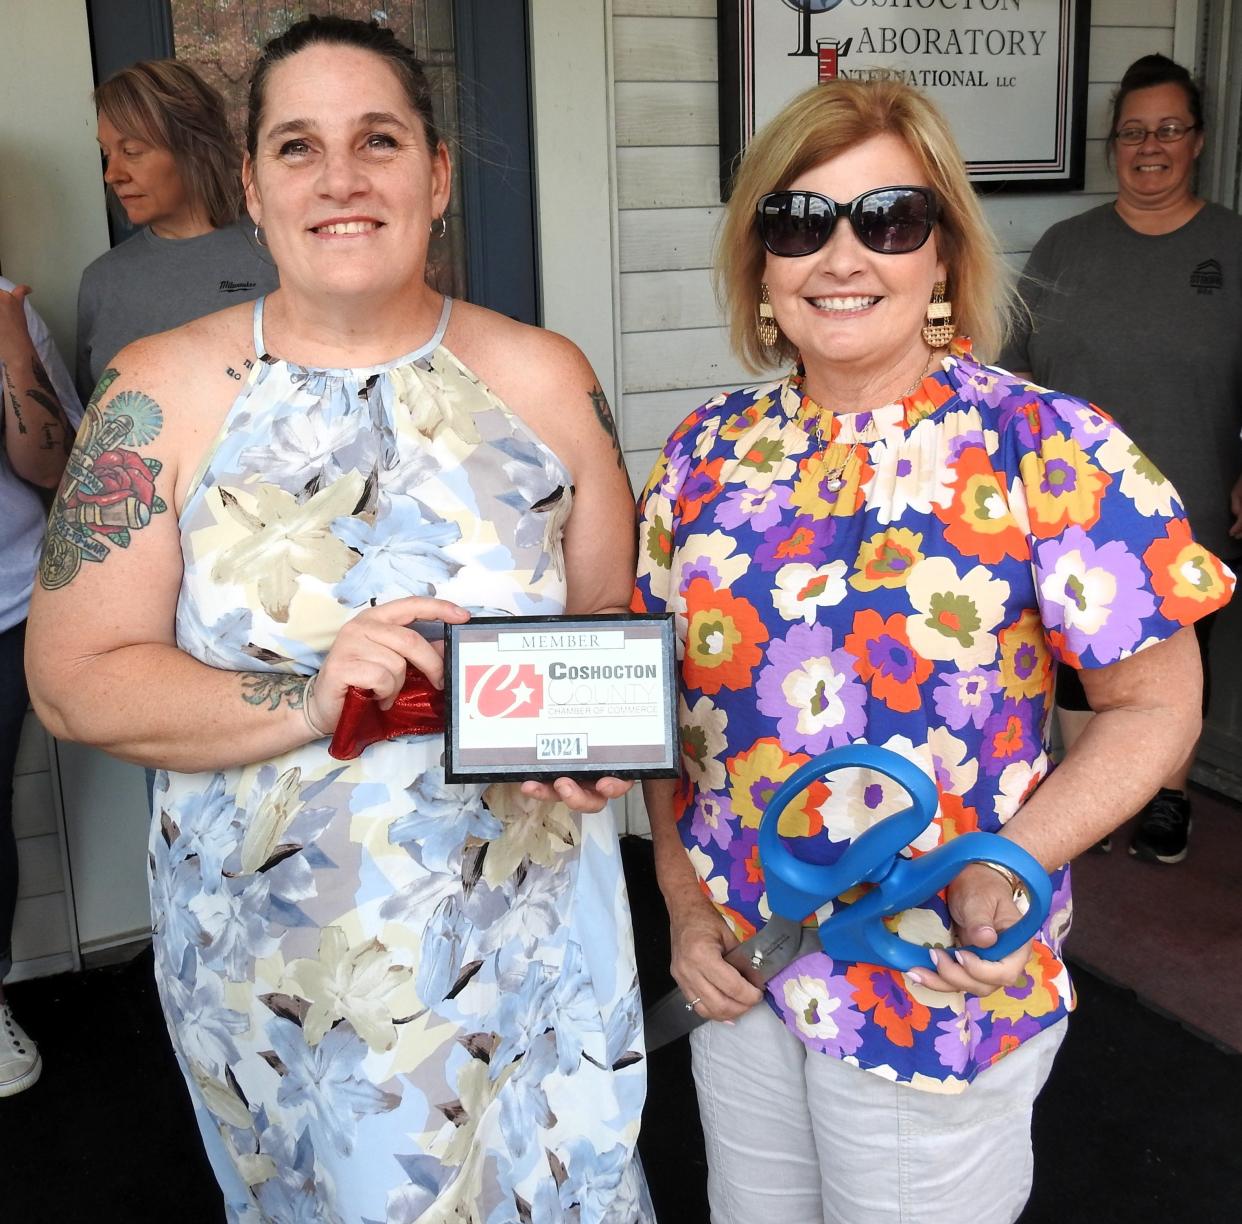 Kitt Silva of Silva Linings Cheesecakery with Amy Crown of the Coshocton County Chamber of Commerce. A ribbon cutting was held for the new cooperative of several local bakers.